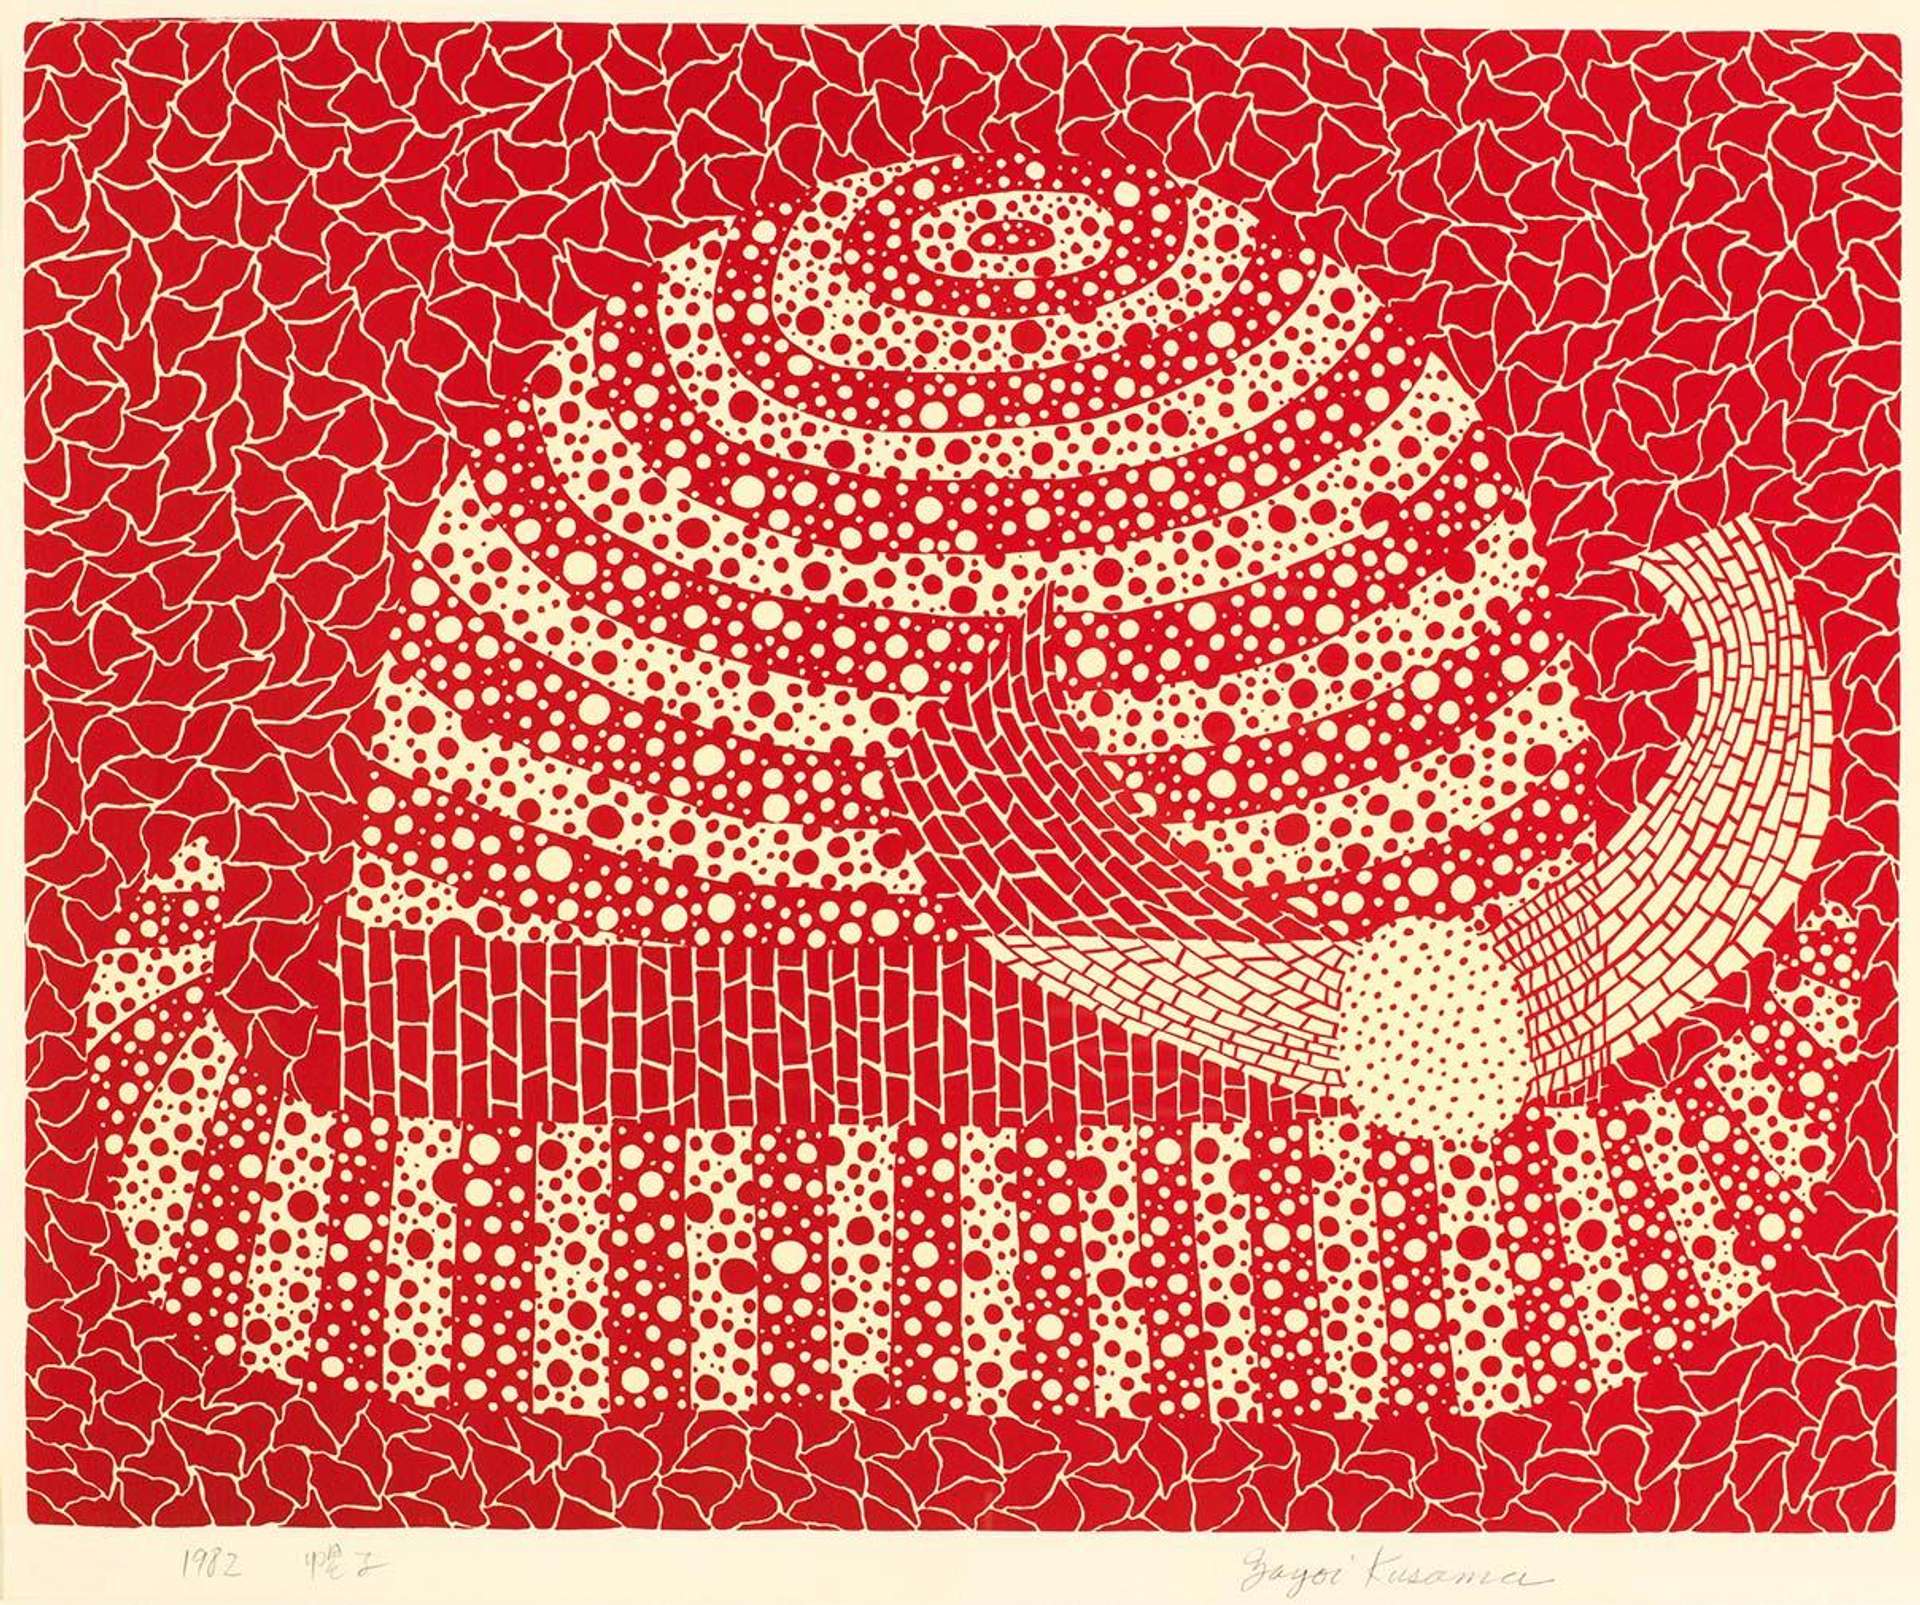 Yayoi Kusama’s Hat (red). A screenprint of a hat made of white and red polka dot patterns against a red and white web-patterned background.